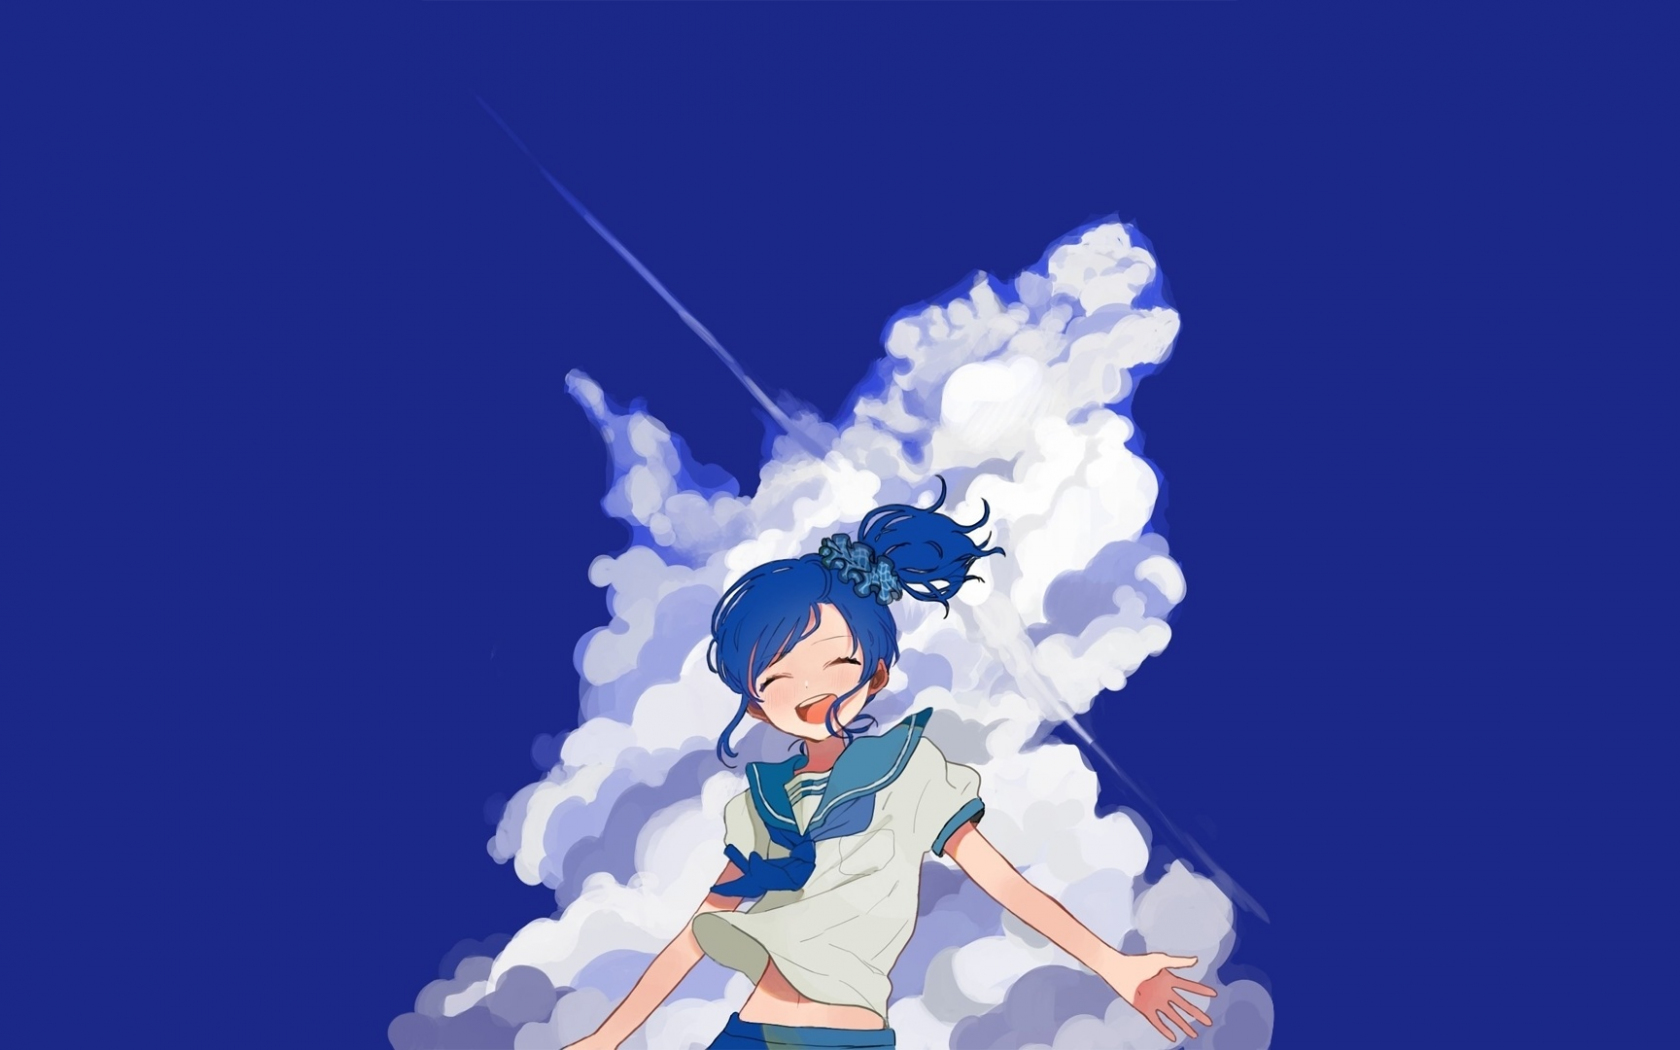 Download wallpaper 1680x1050 happy mood, clouds, blue sky, anime girl ...